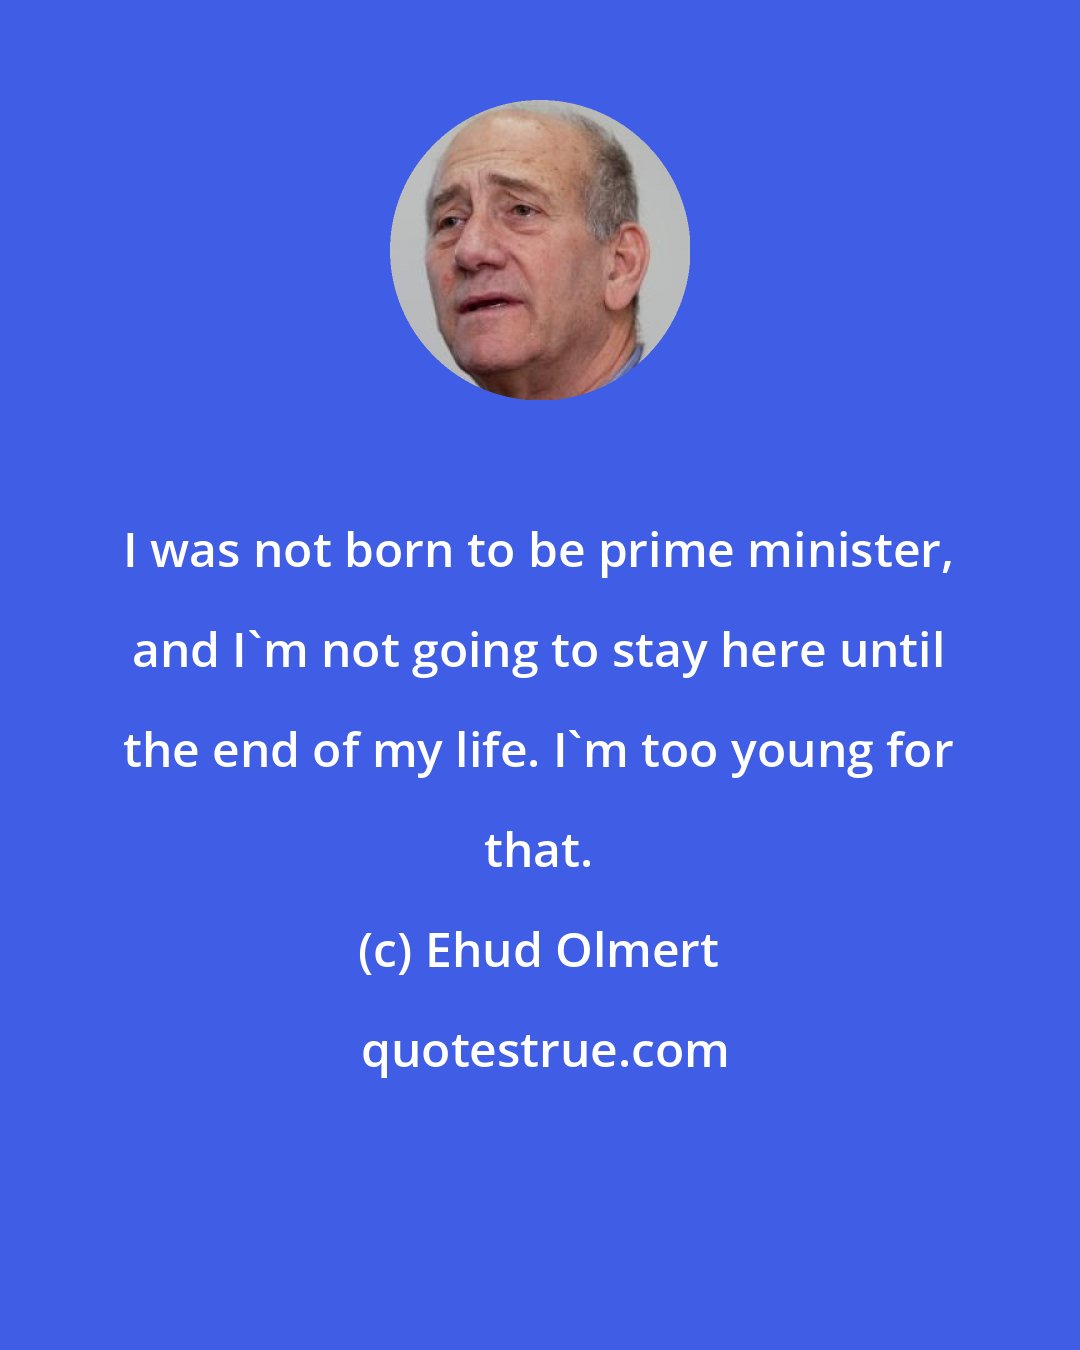 Ehud Olmert: I was not born to be prime minister, and I'm not going to stay here until the end of my life. I'm too young for that.